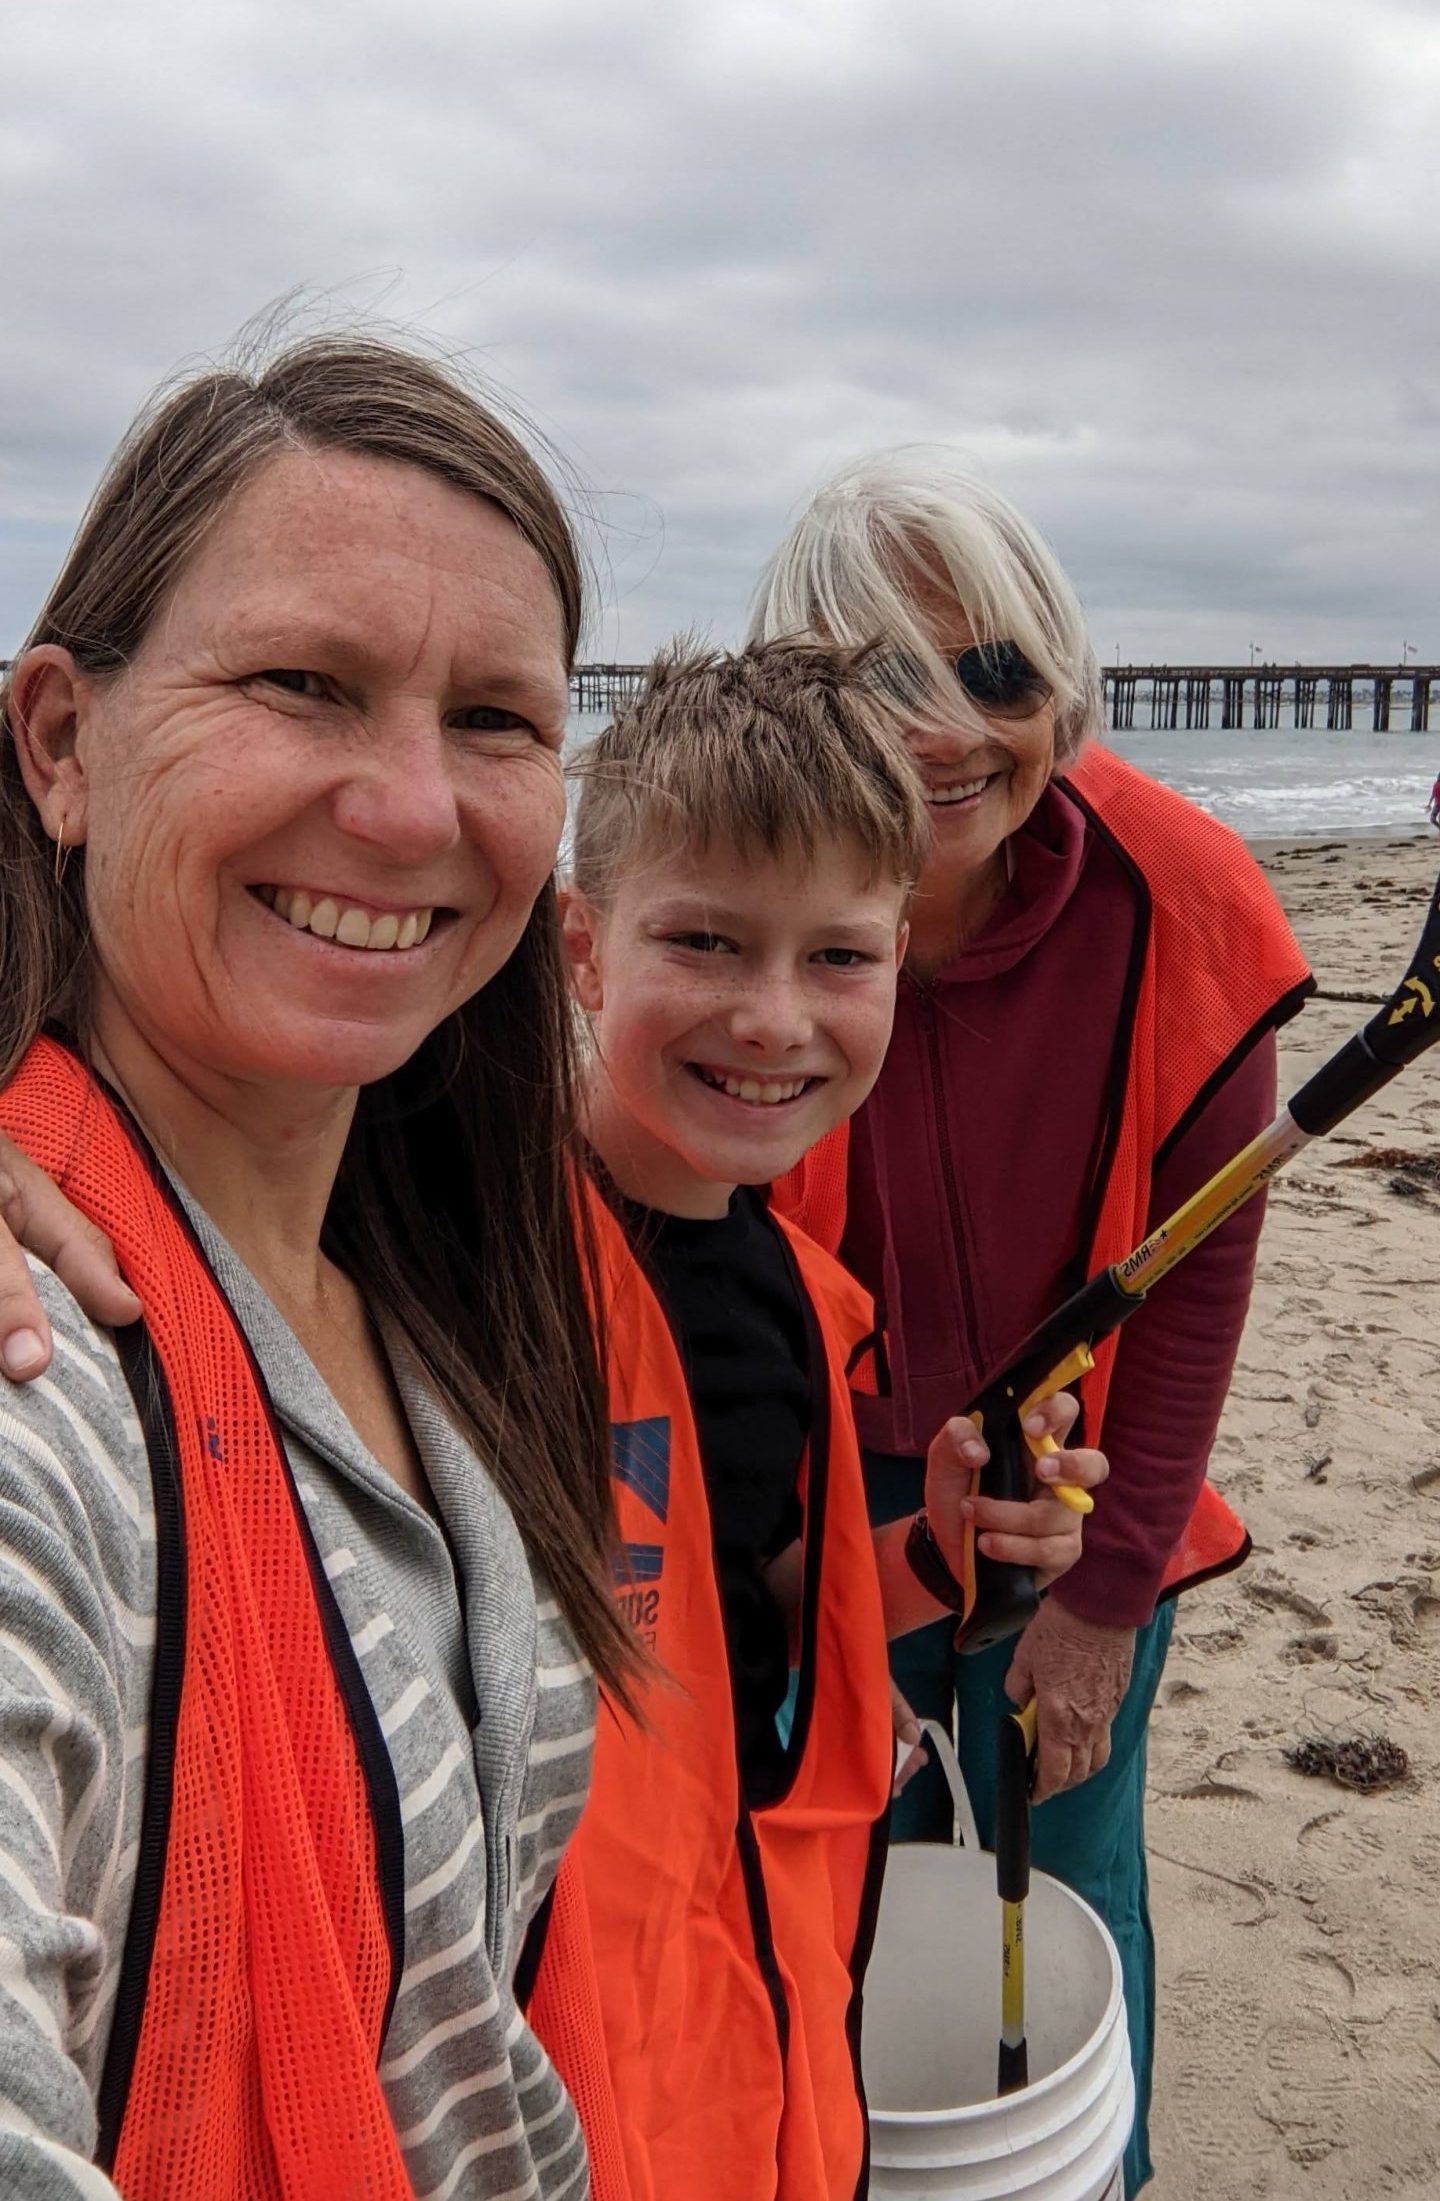 Tania with her family picking up trash at the Ventura Pier.